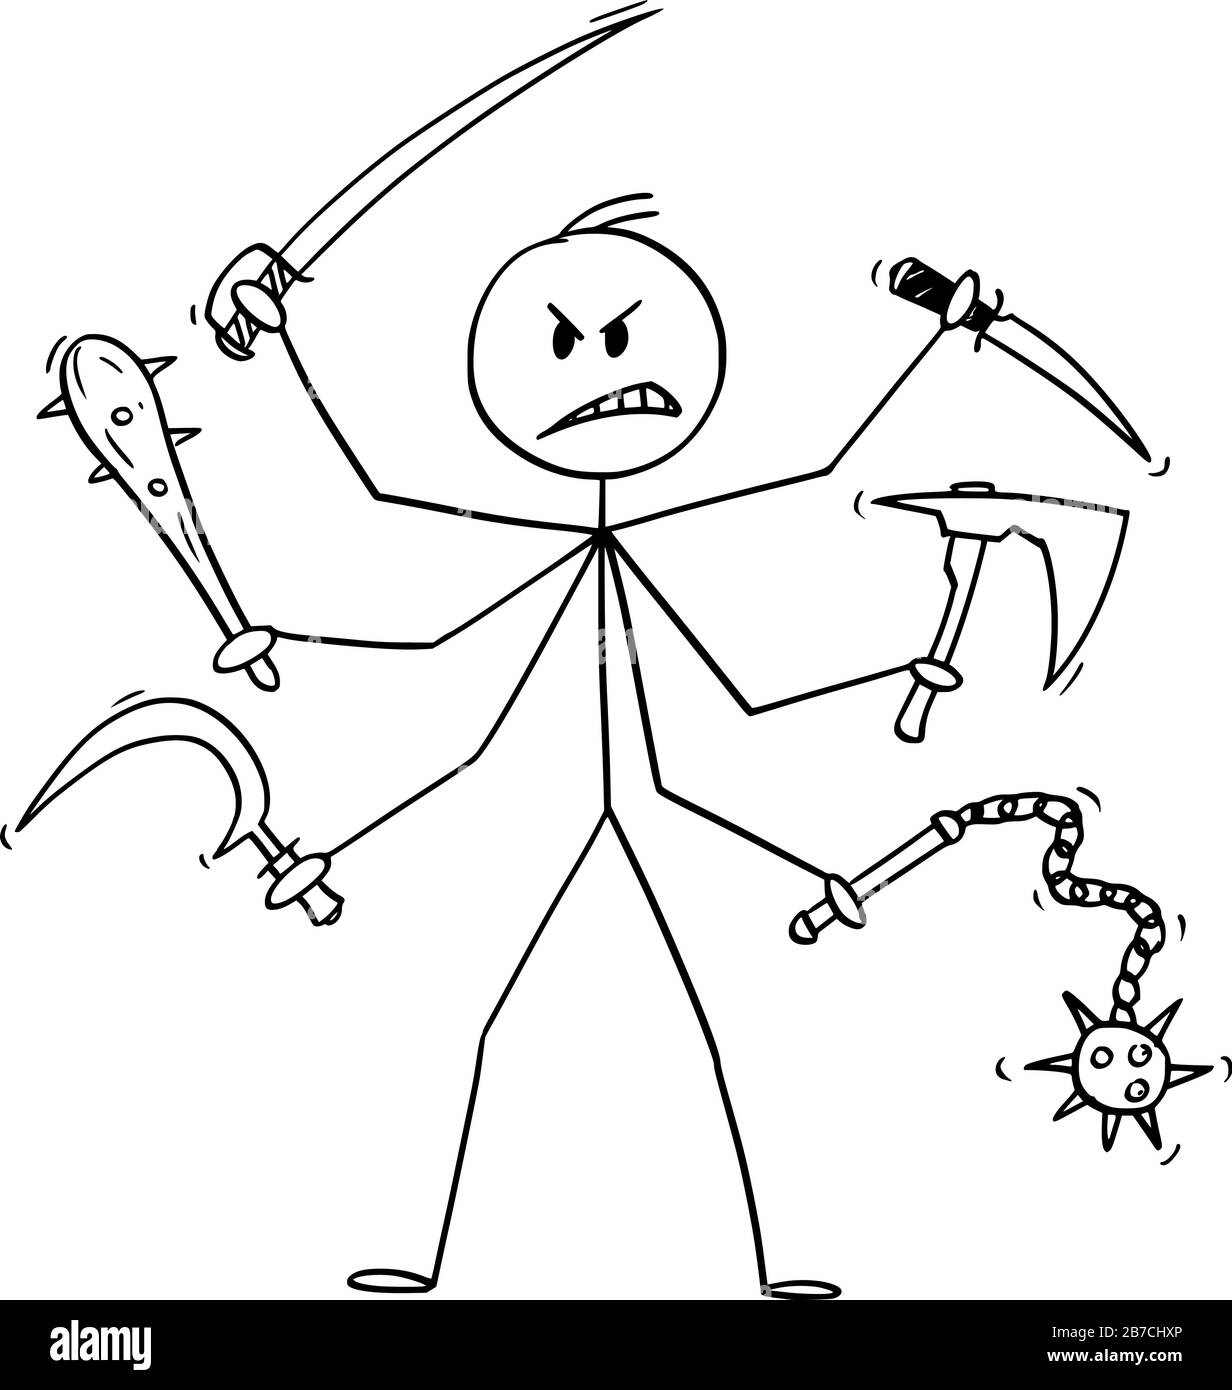 Vector cartoon stick figure drawing conceptual illustration of man with six arms holding cold weapons like sabre,ax,knife,club,sickle and flail.Concept of fight and violence. Stock Vector